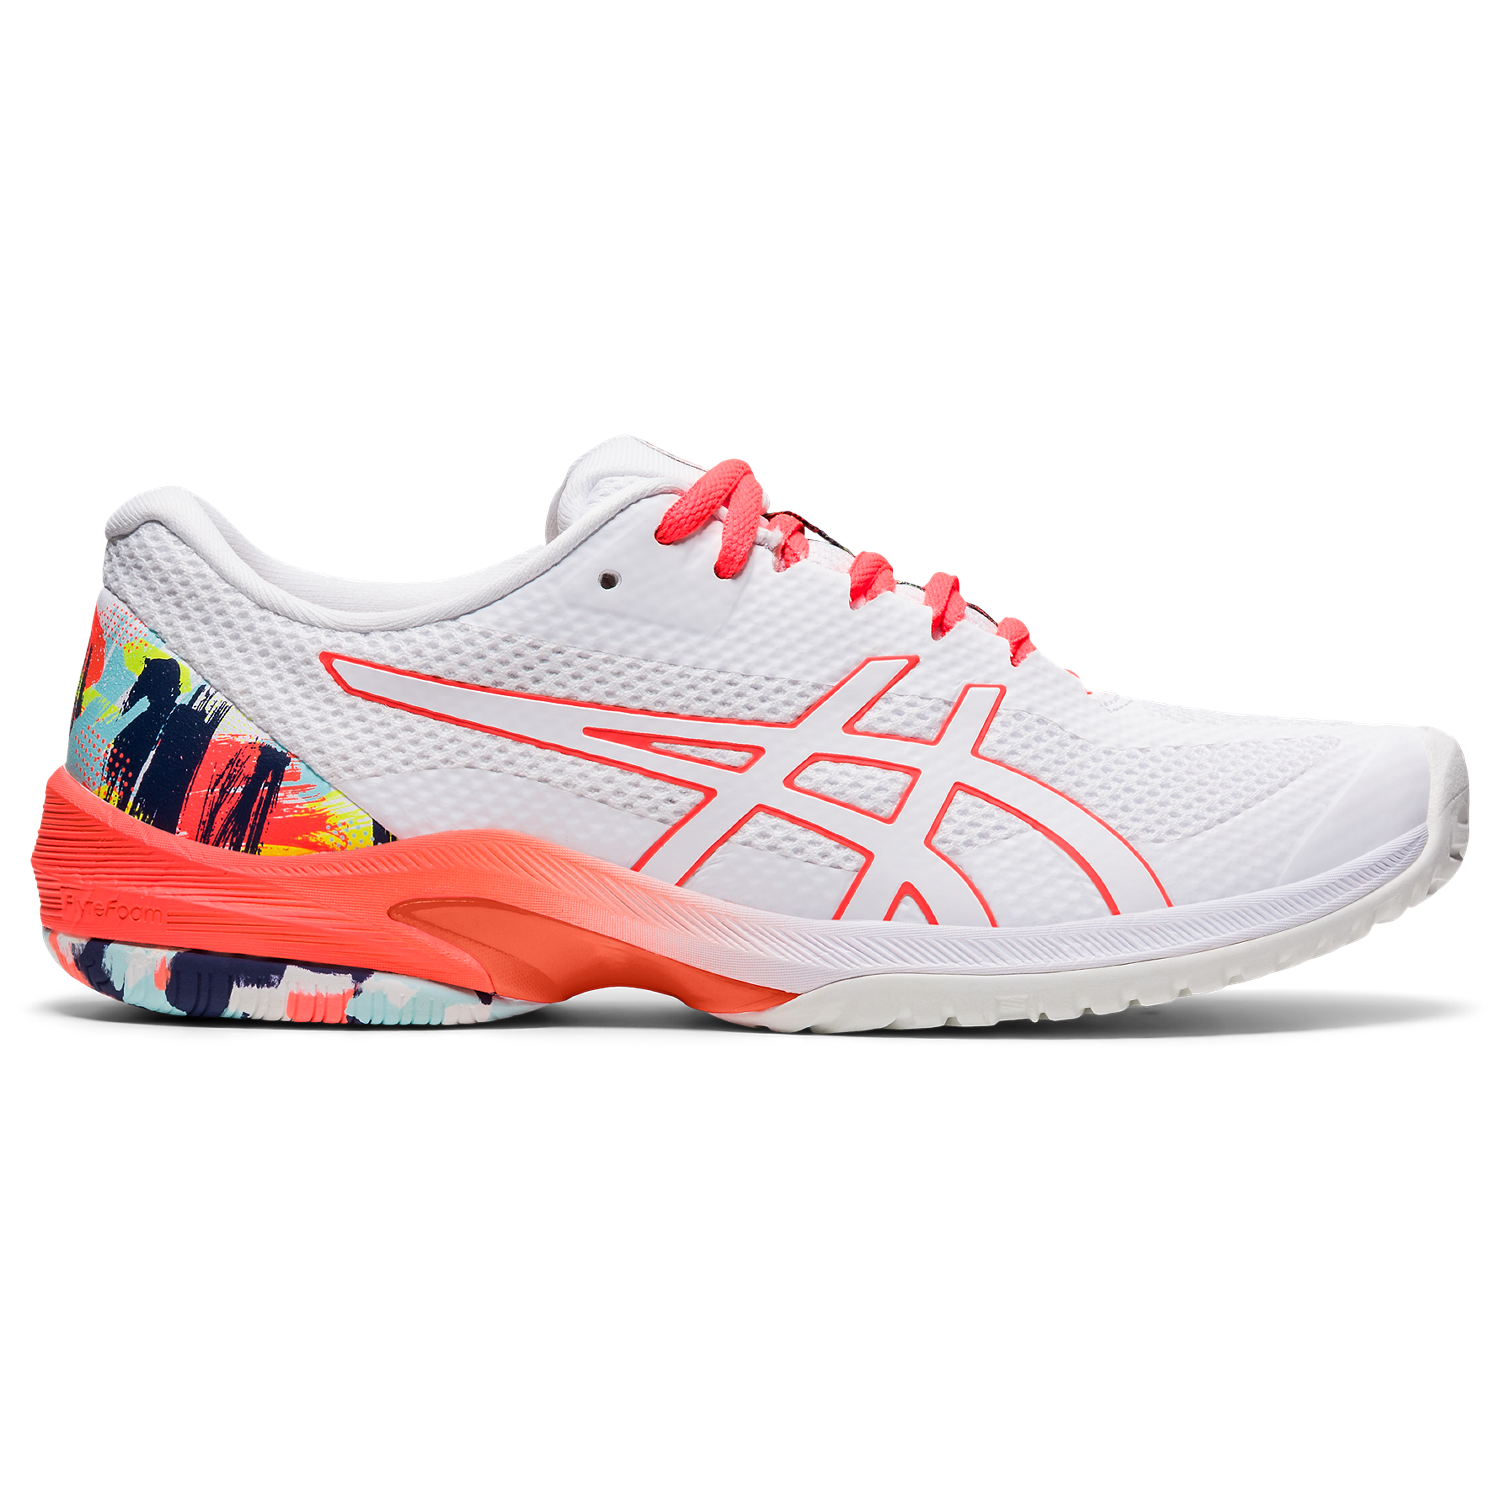 linkage transmission Relaxing Asics Court Speed FF 21 Women's Tennis Shoes - Red/White | PGA TOUR  Superstore